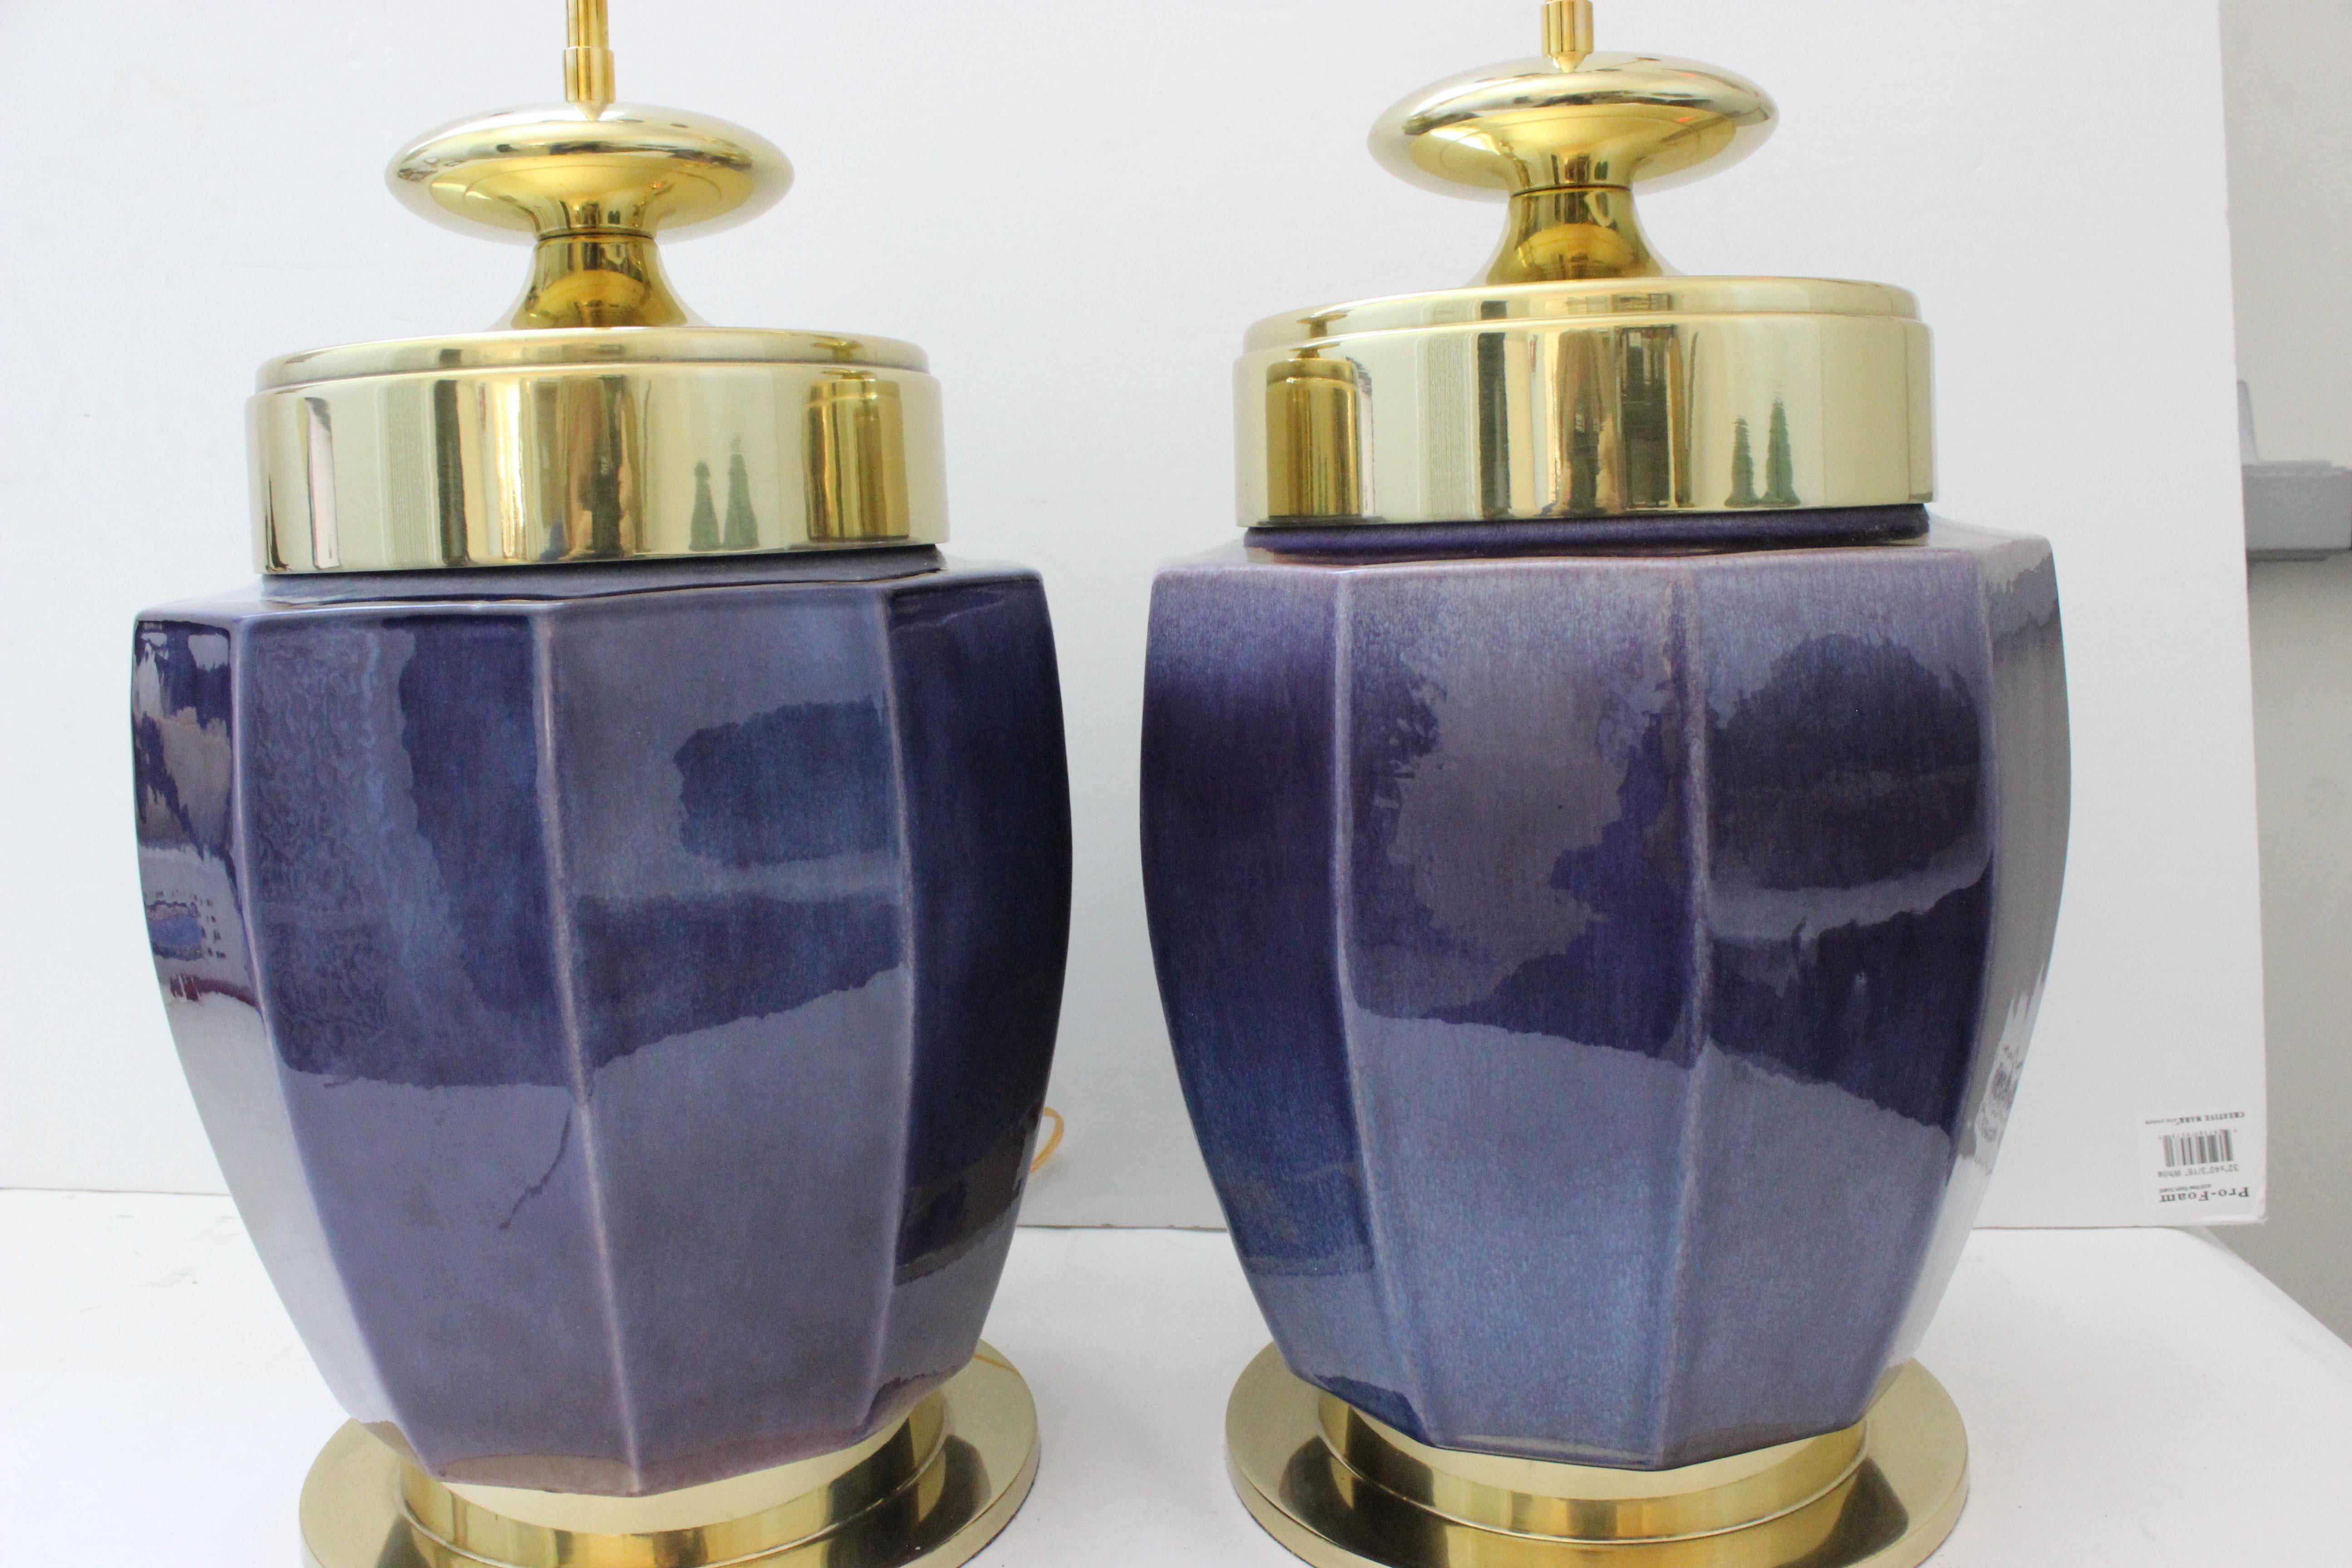 Polished Pair of Aubergine Glazed Lamps by Stiffel